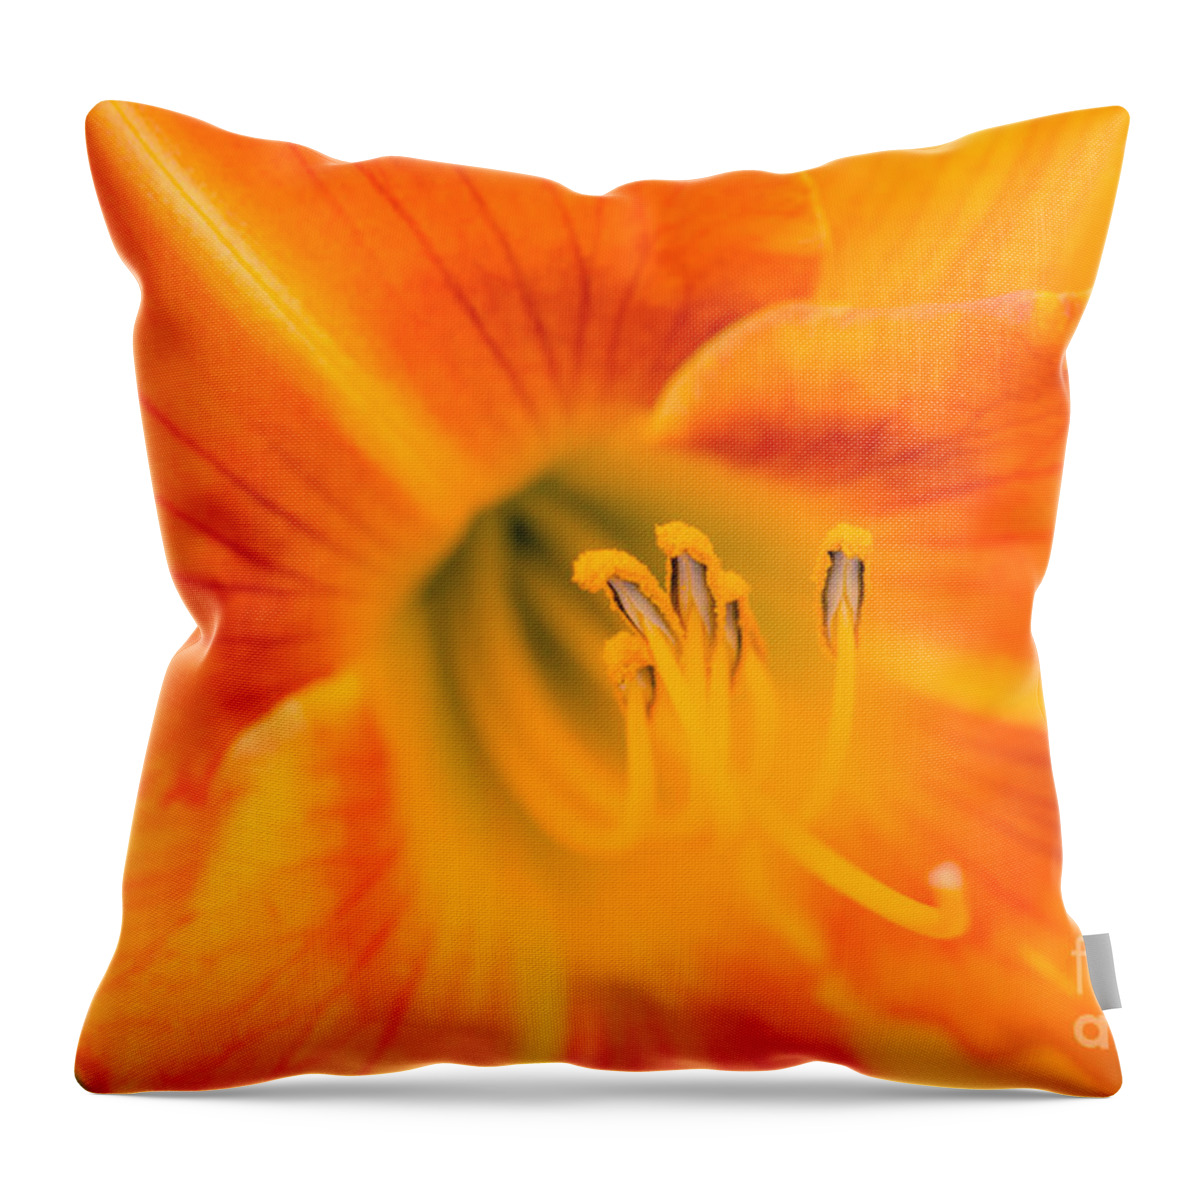 Orange Throw Pillow featuring the photograph Nothing Rhymes with Orange by Ana V Ramirez